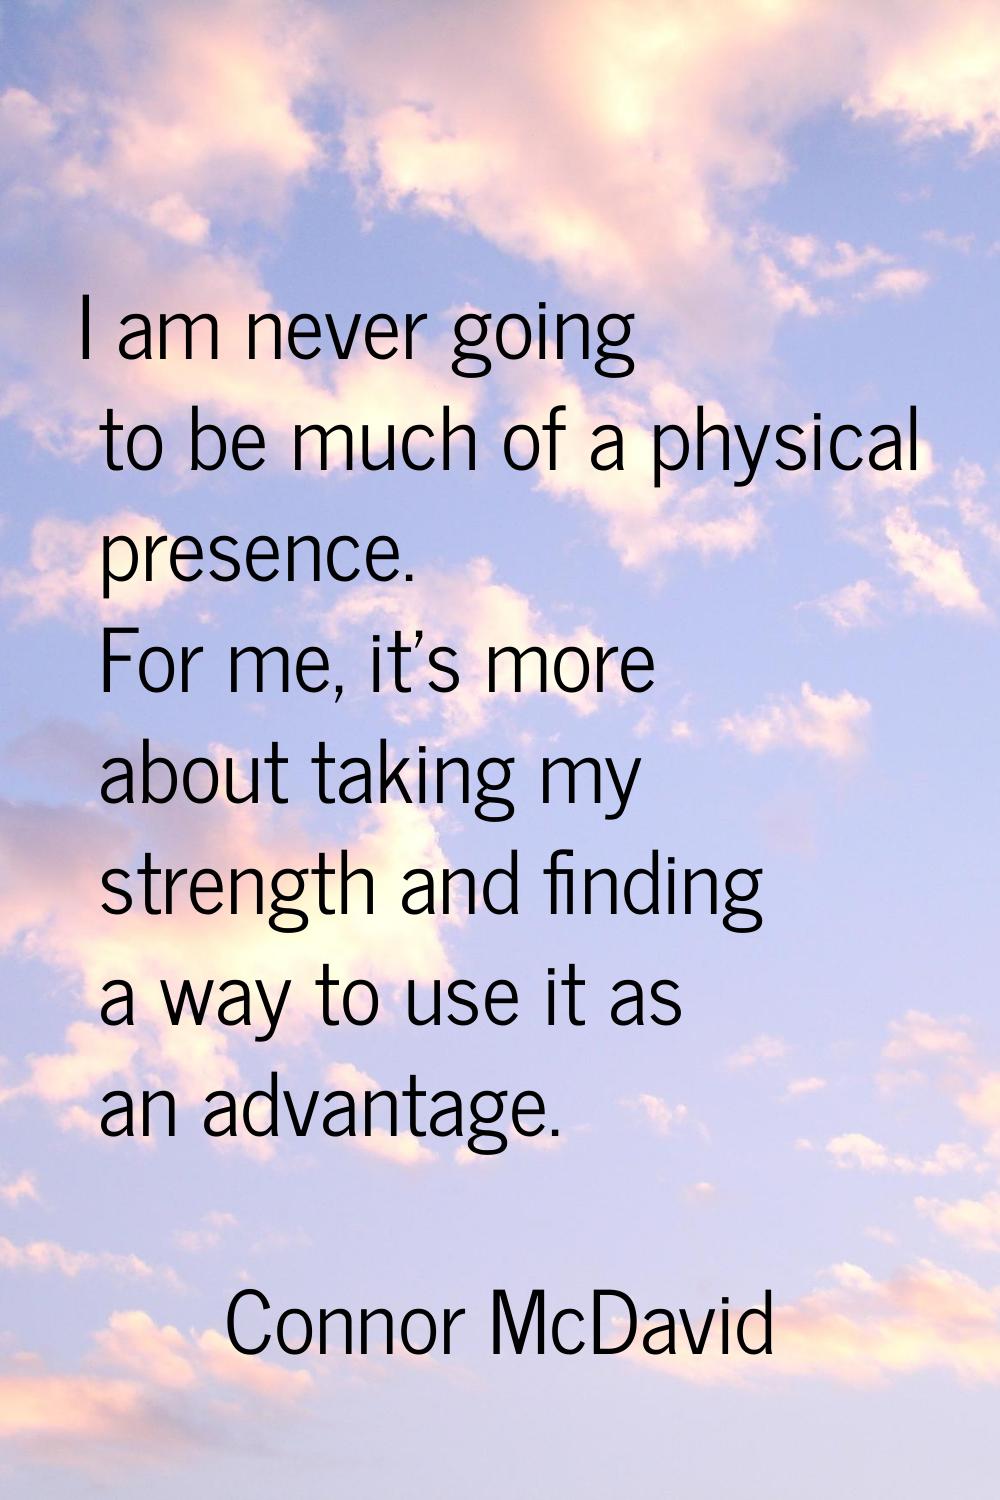 I am never going to be much of a physical presence. For me, it's more about taking my strength and 